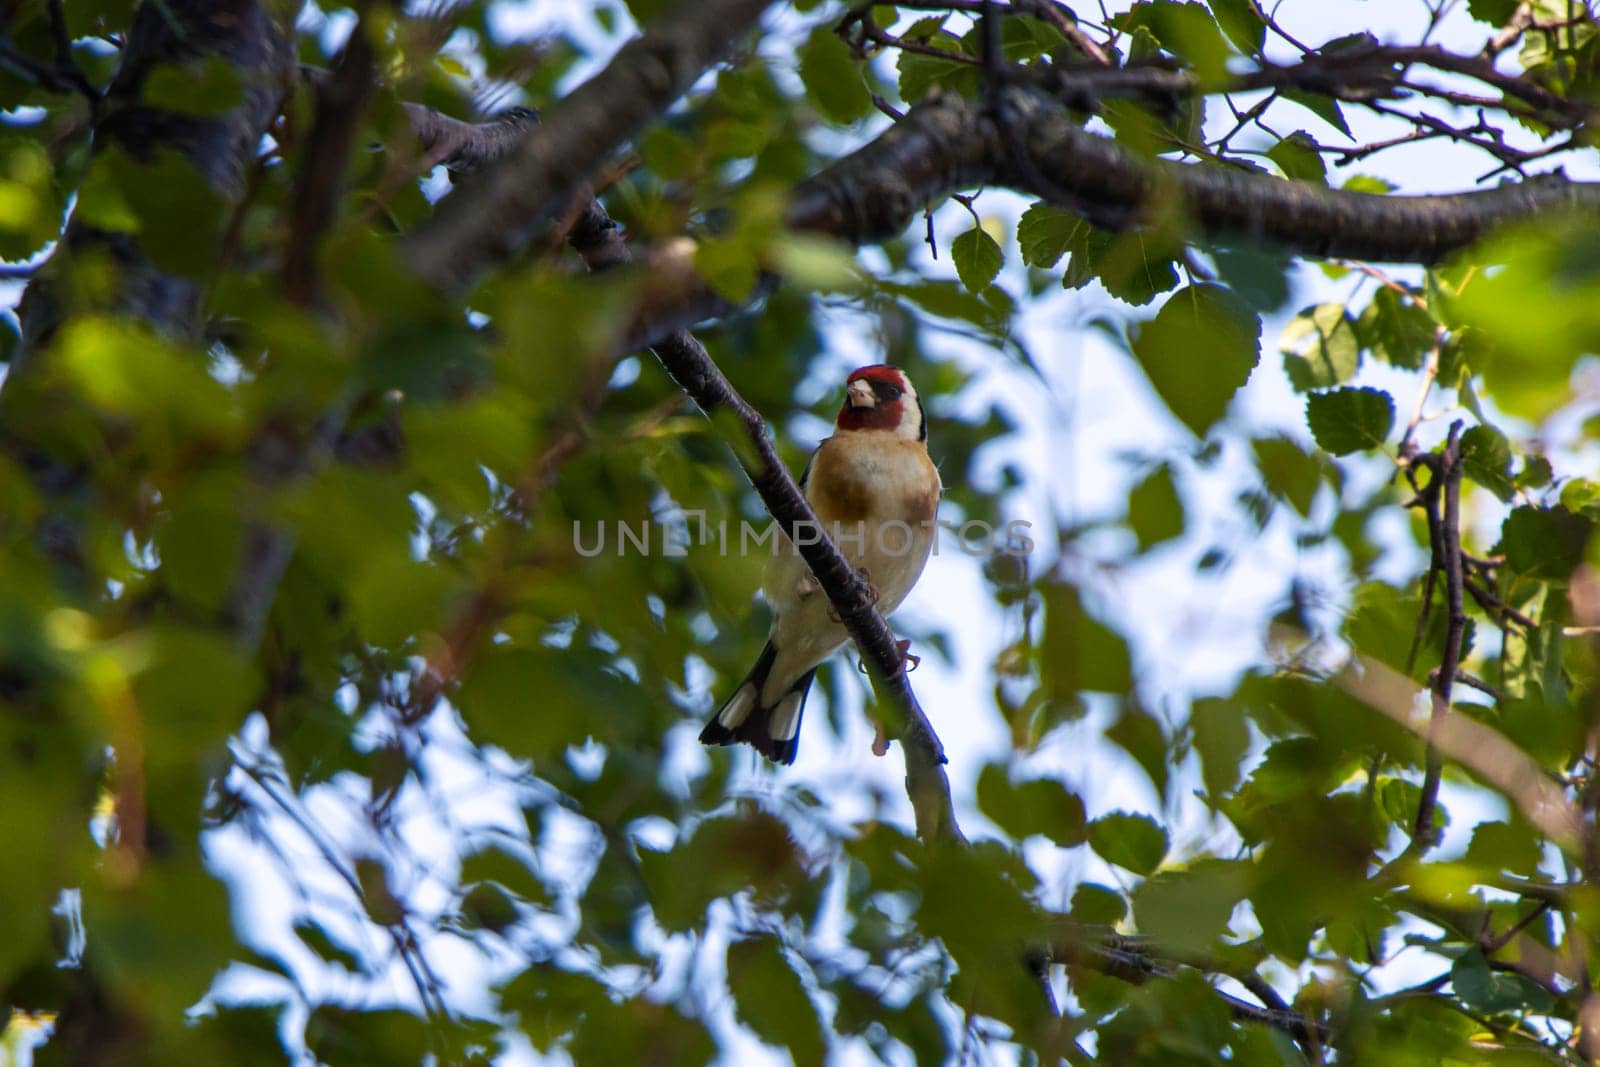 A European Goldfinch perched in the branches of a tree by StefanMal